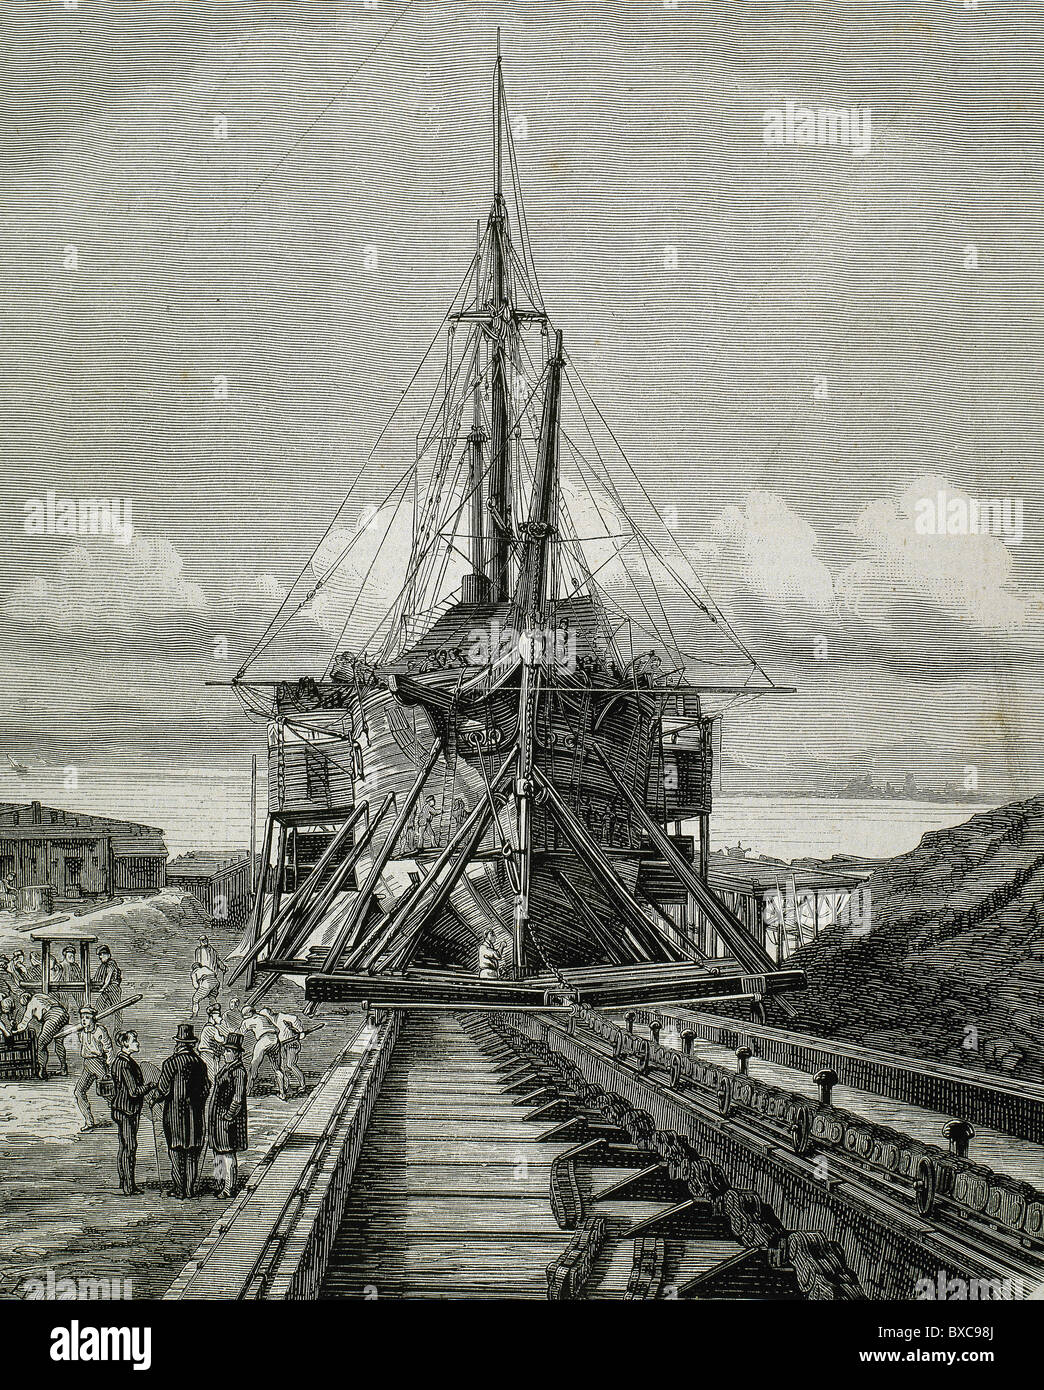 The dry dock. Barcelona. Engraving by Manchon. 'The Spanish and American Illustration', 1872. Stock Photo